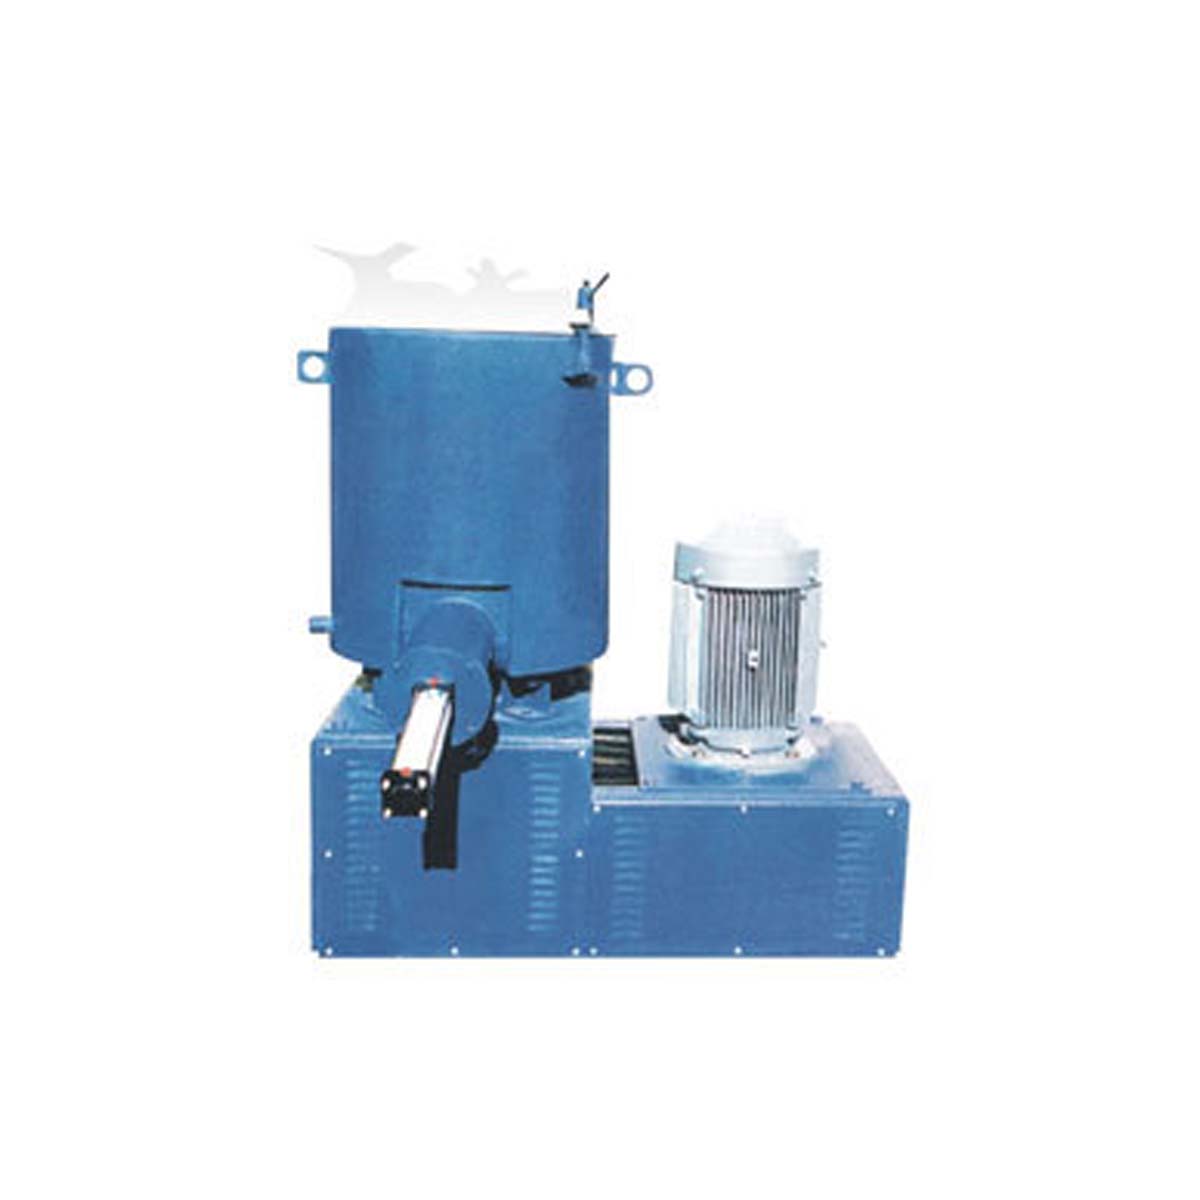 High Speed Mixer Manufacturers, Suppliers and Exporters in Delhi